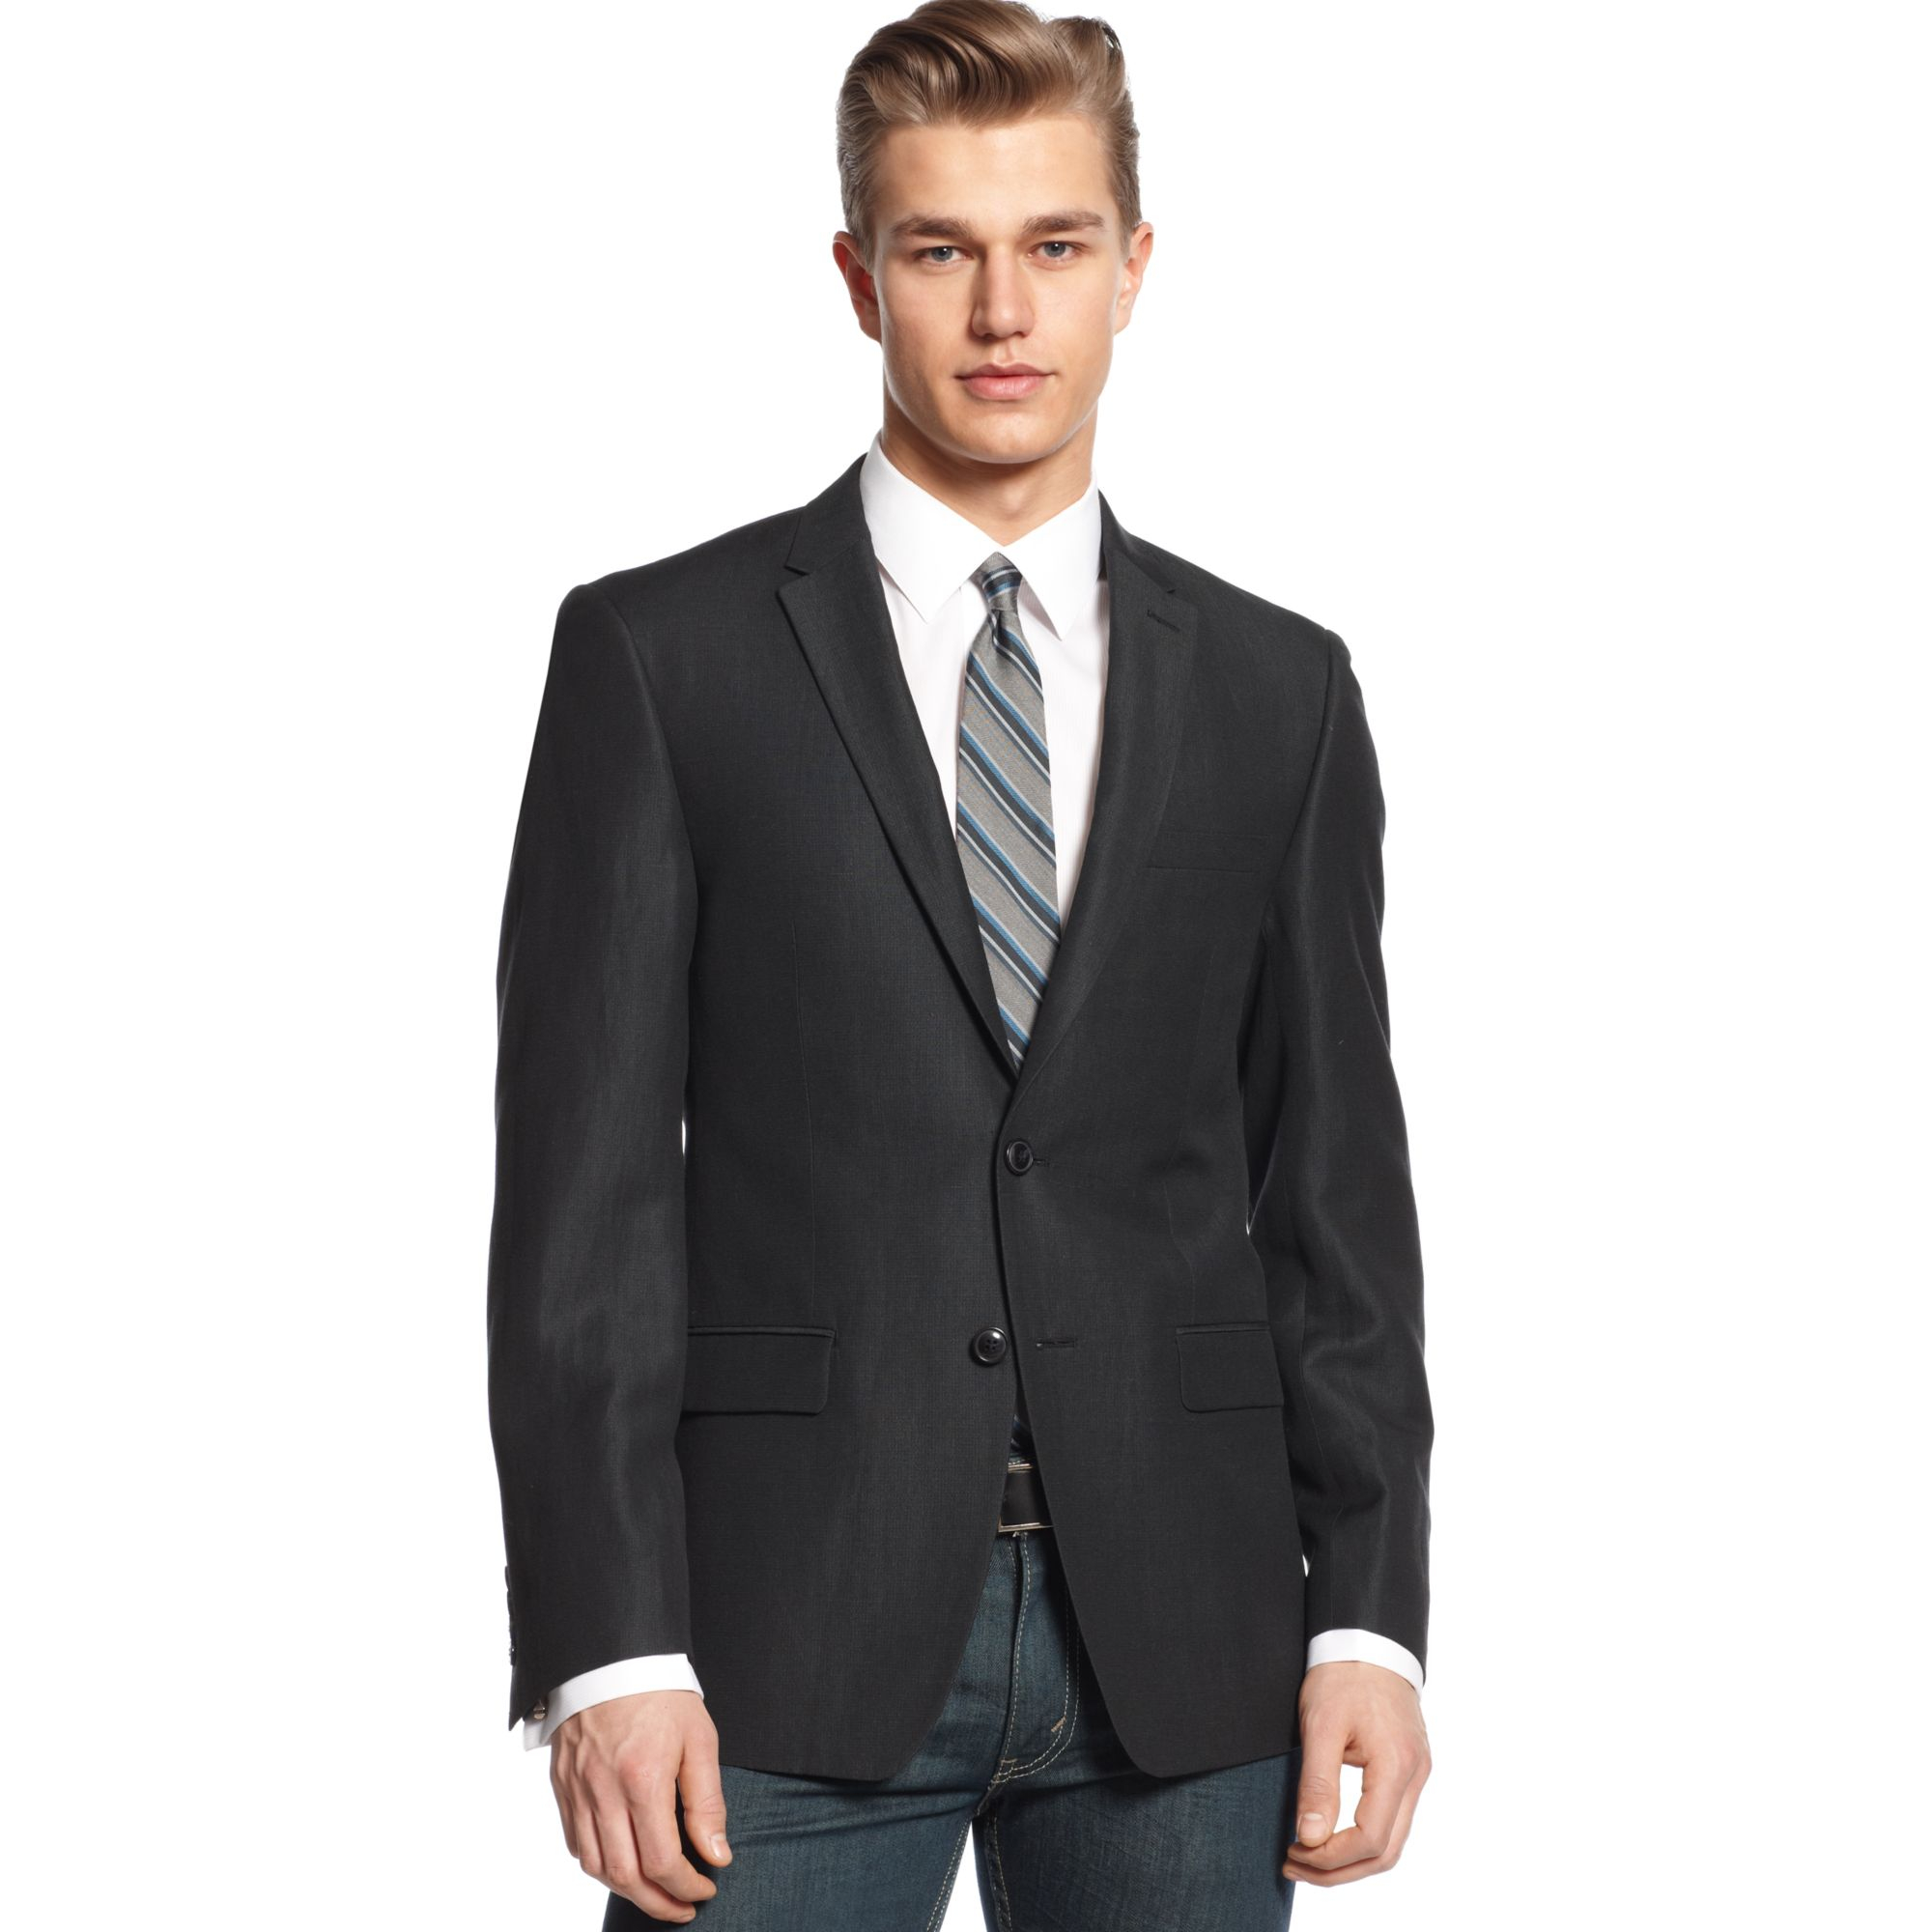 Lyst - Dkny Sport Coat Black Solid Texture Extra Slim Fit in Black for Men